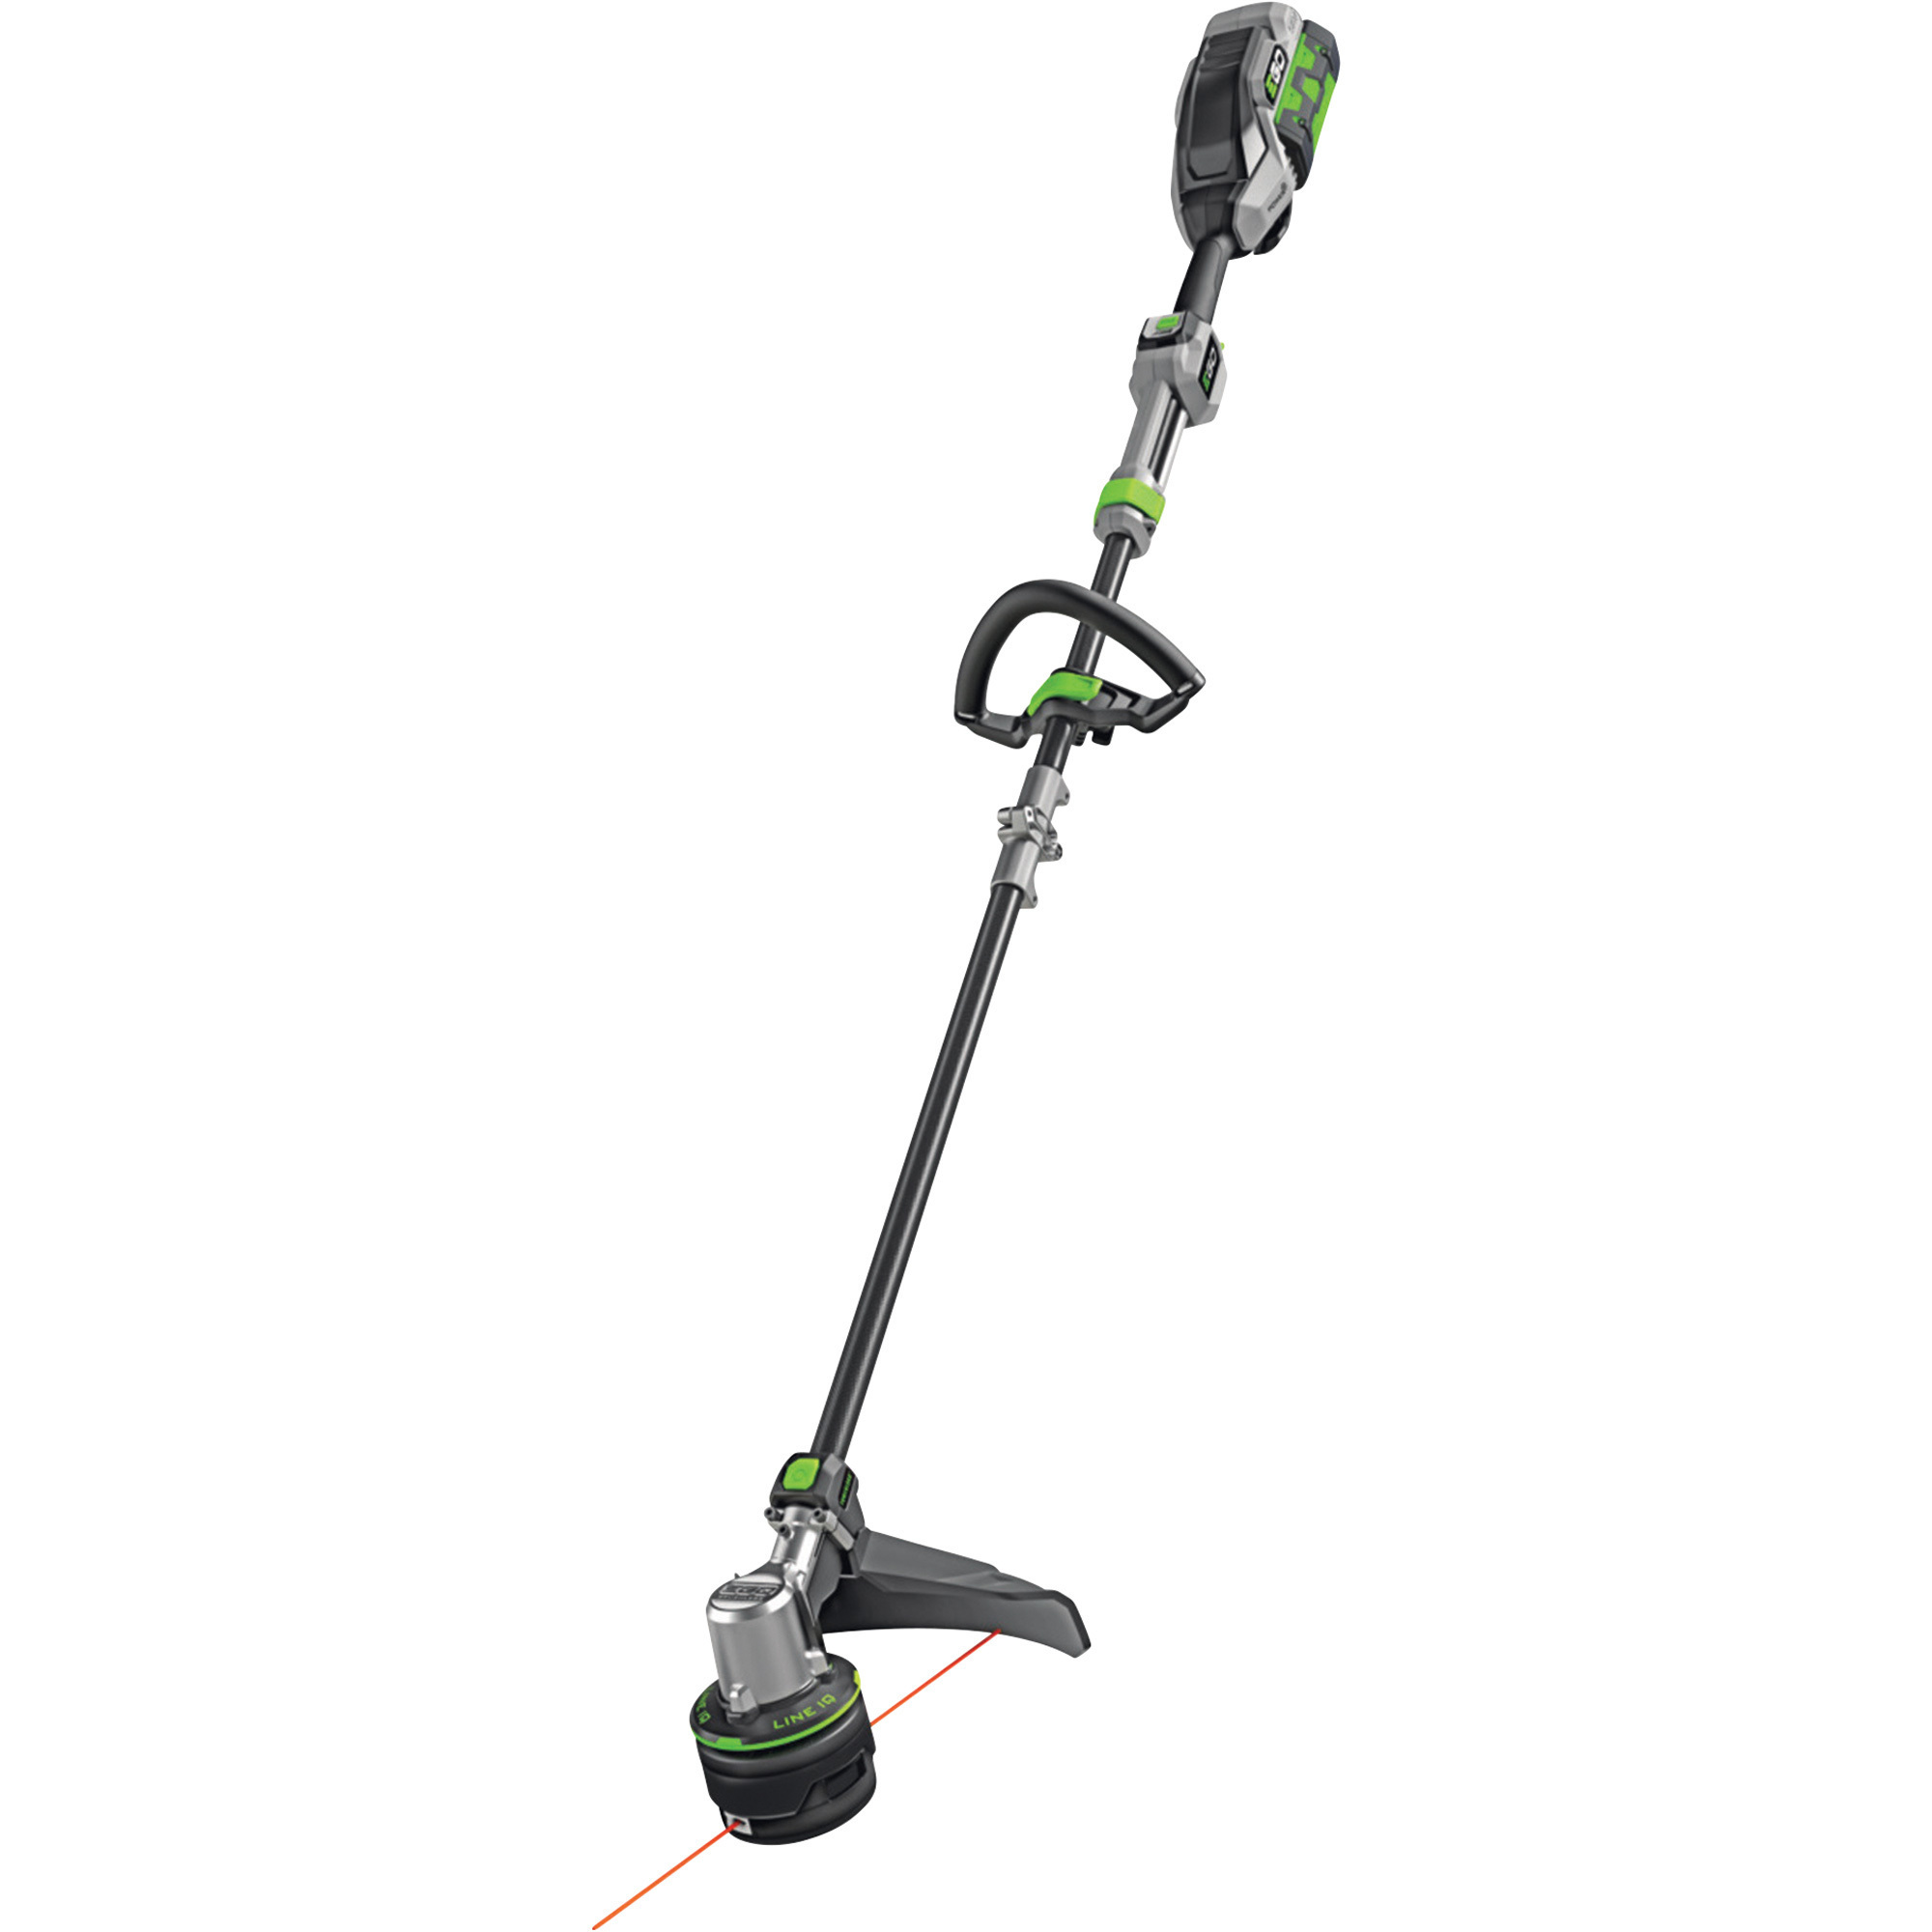 EGO POWER+ 56V POWERLOAD String Trimmer Kit , 16Inch Cutting Swath, 4.0 Ah Battery, Charger, Model ST1623T